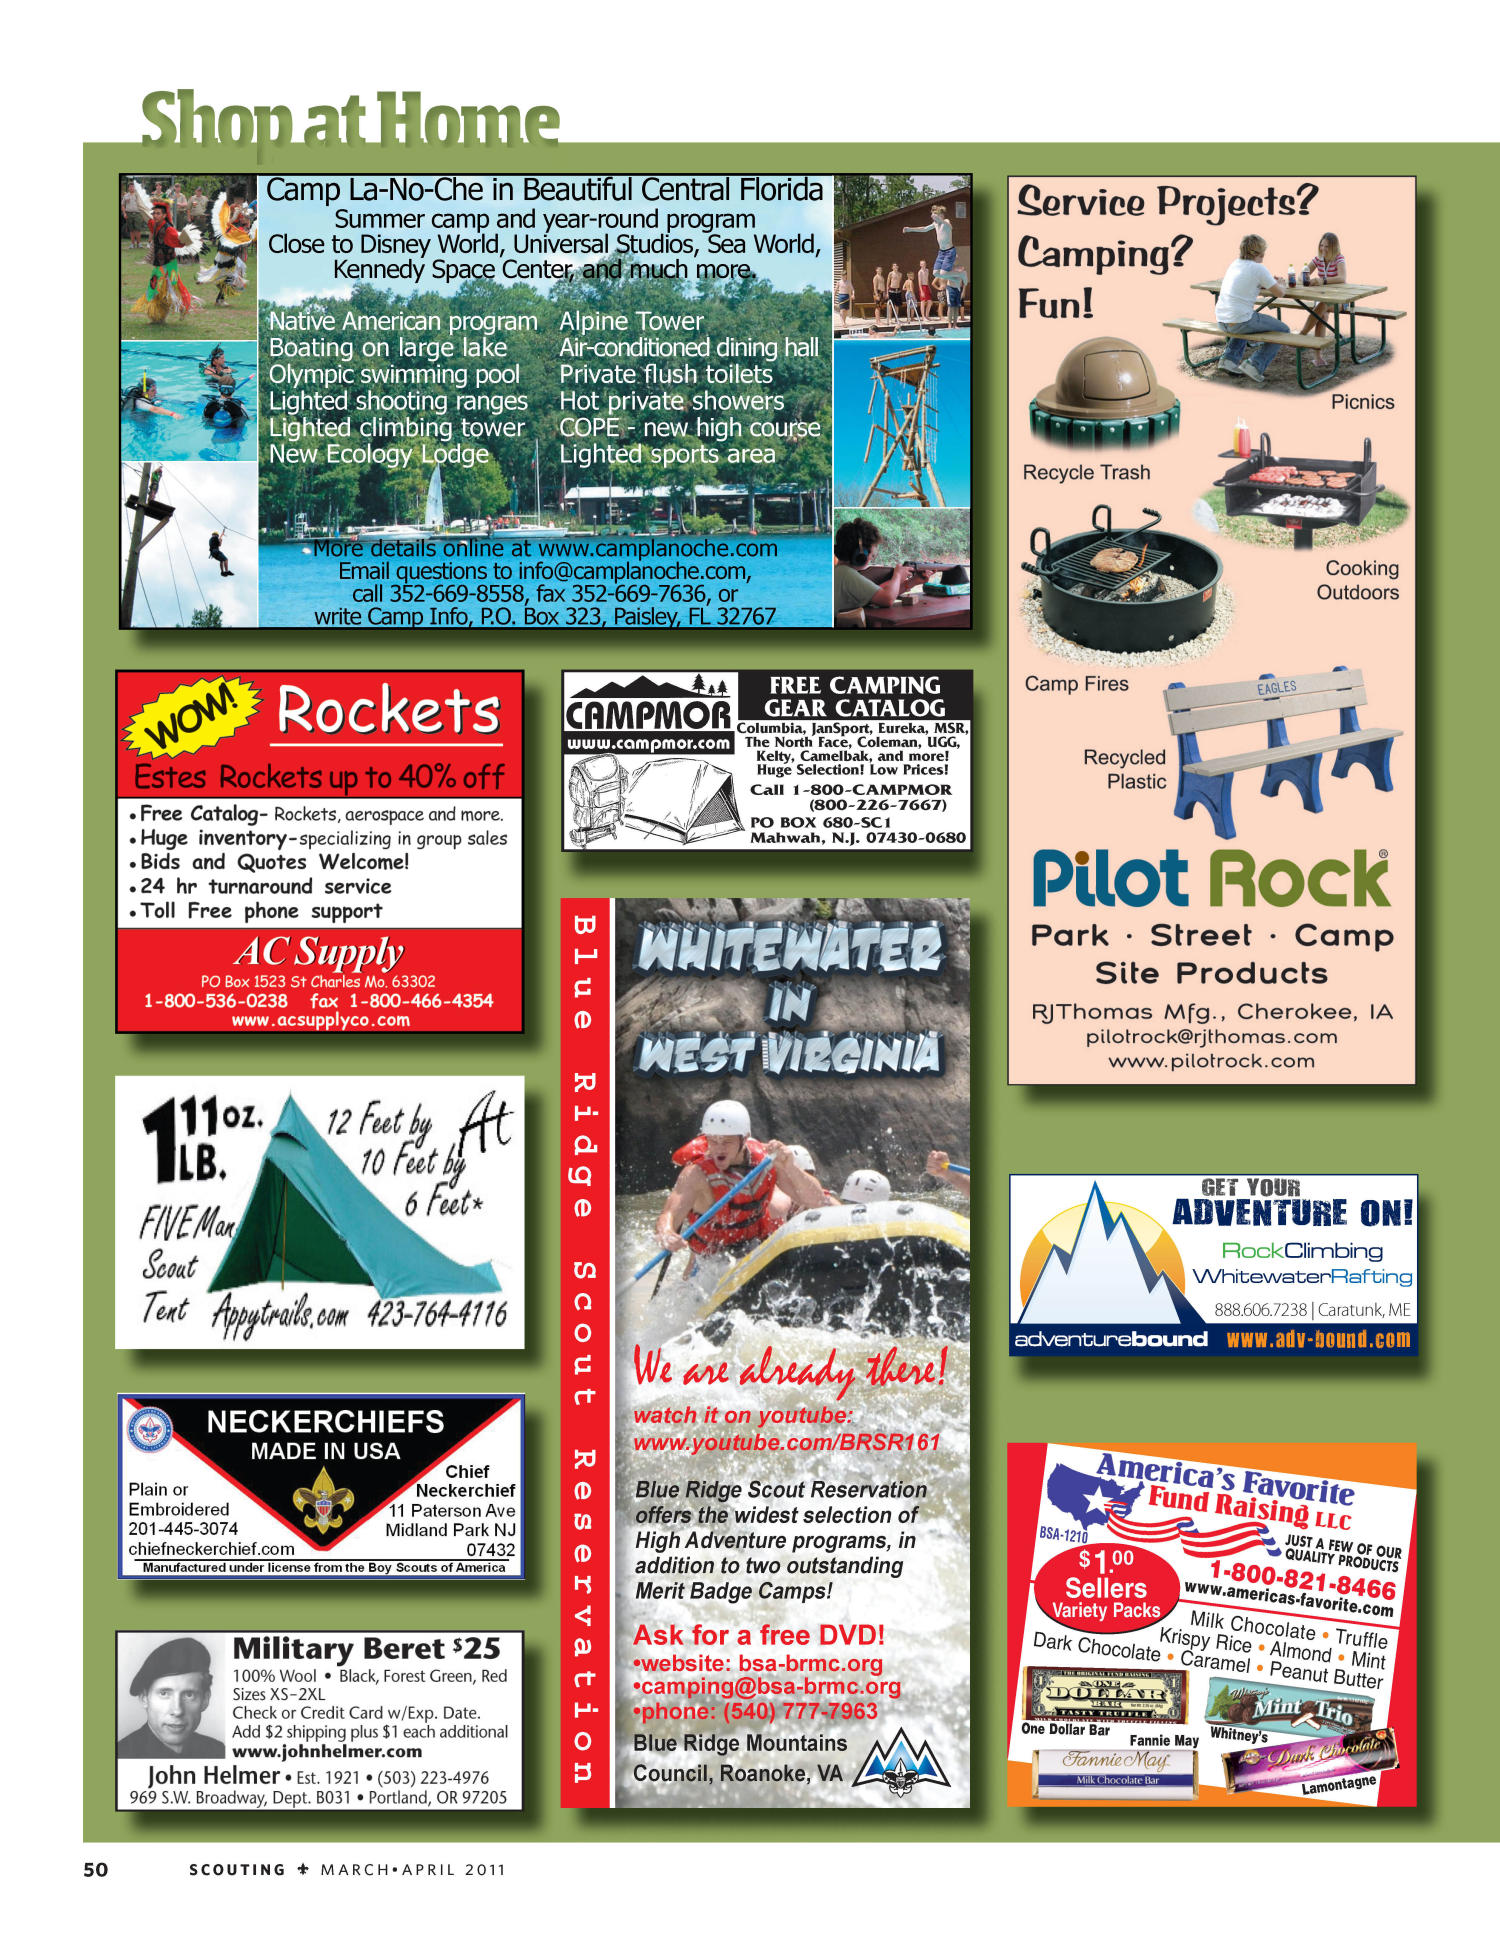 Scouting, Volume 99, Number 2, March-April 2011
                                                
                                                    50
                                                